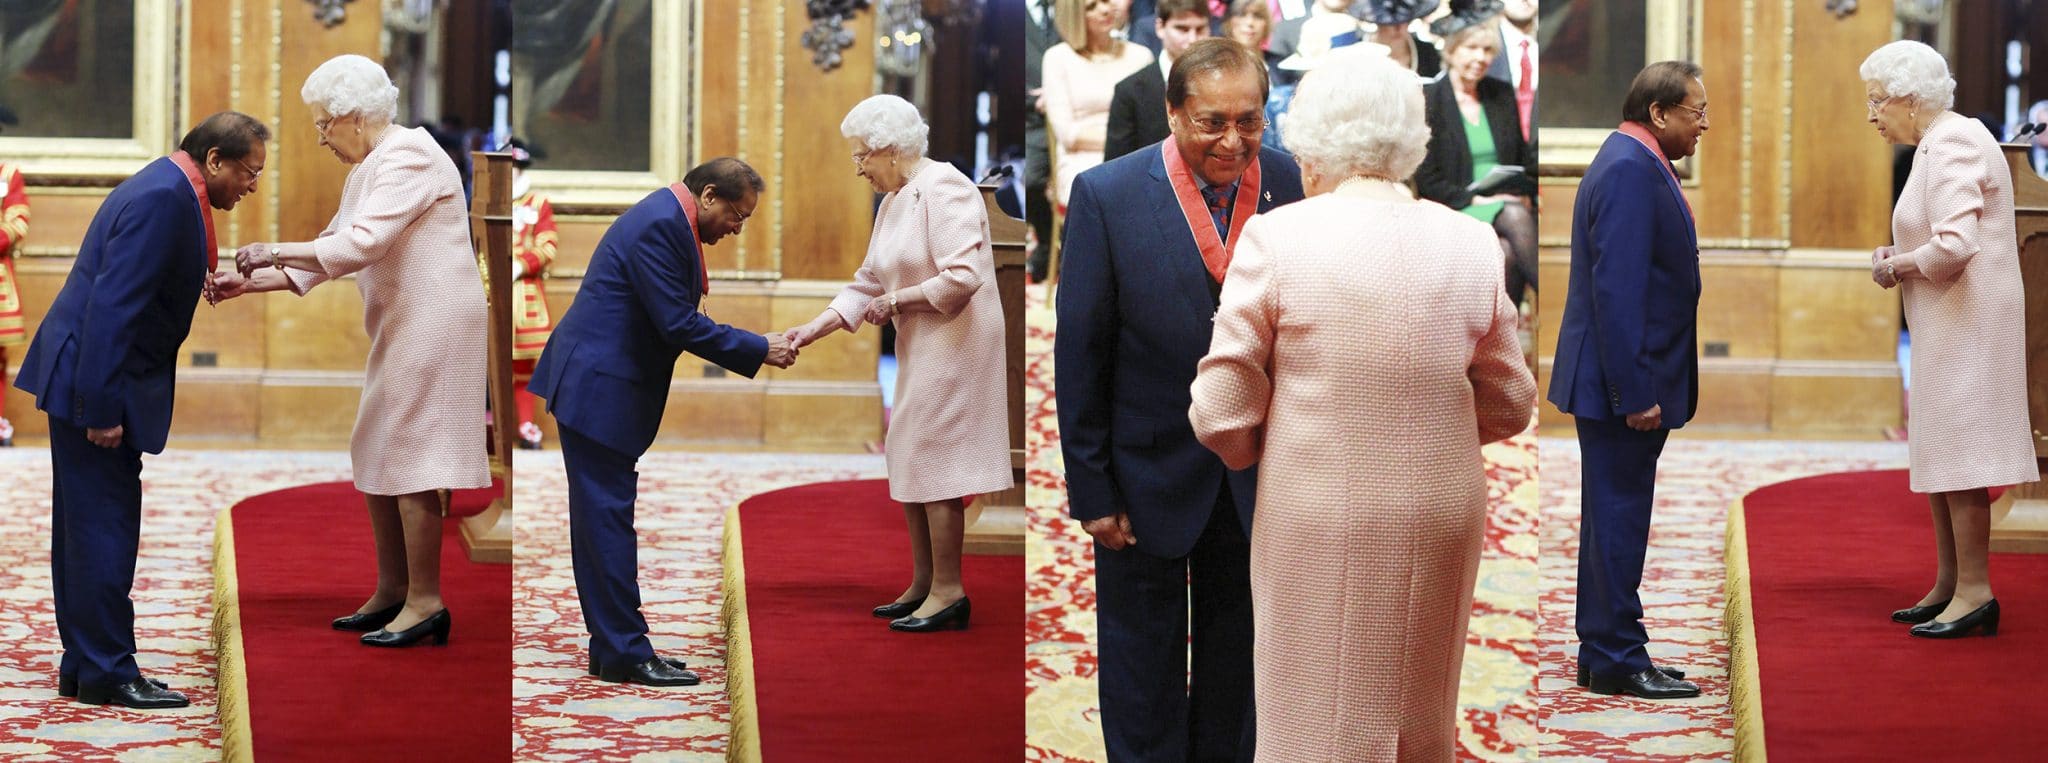 HM Queen Elizabeth II conferring the Most Excellent Order of Commander of the British Empire (CBE) to Dr. Rami Ranger.